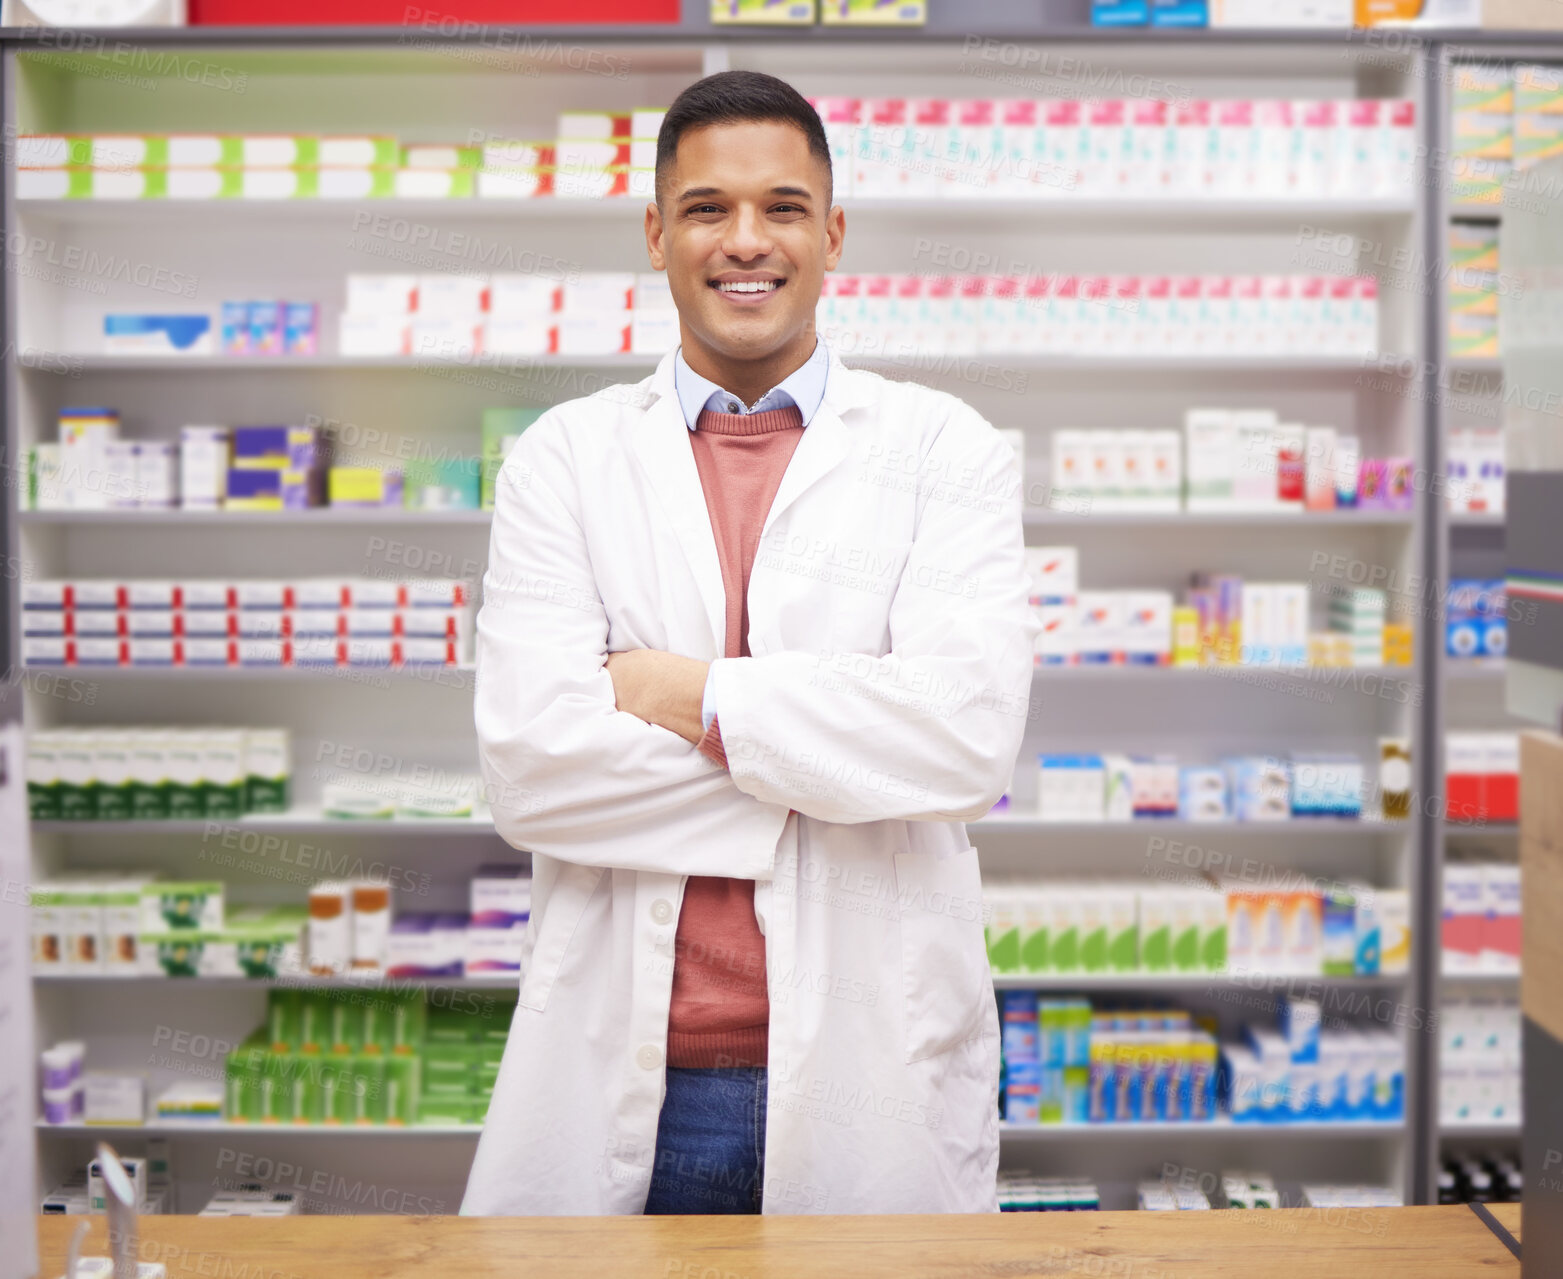 Buy stock photo Pharmacy, smile and confidence, portrait of man at drugstore counter, customer service and medical advice in Brazil. Prescription drugs, pharmacist and inventory of pills and medicine at checkout.